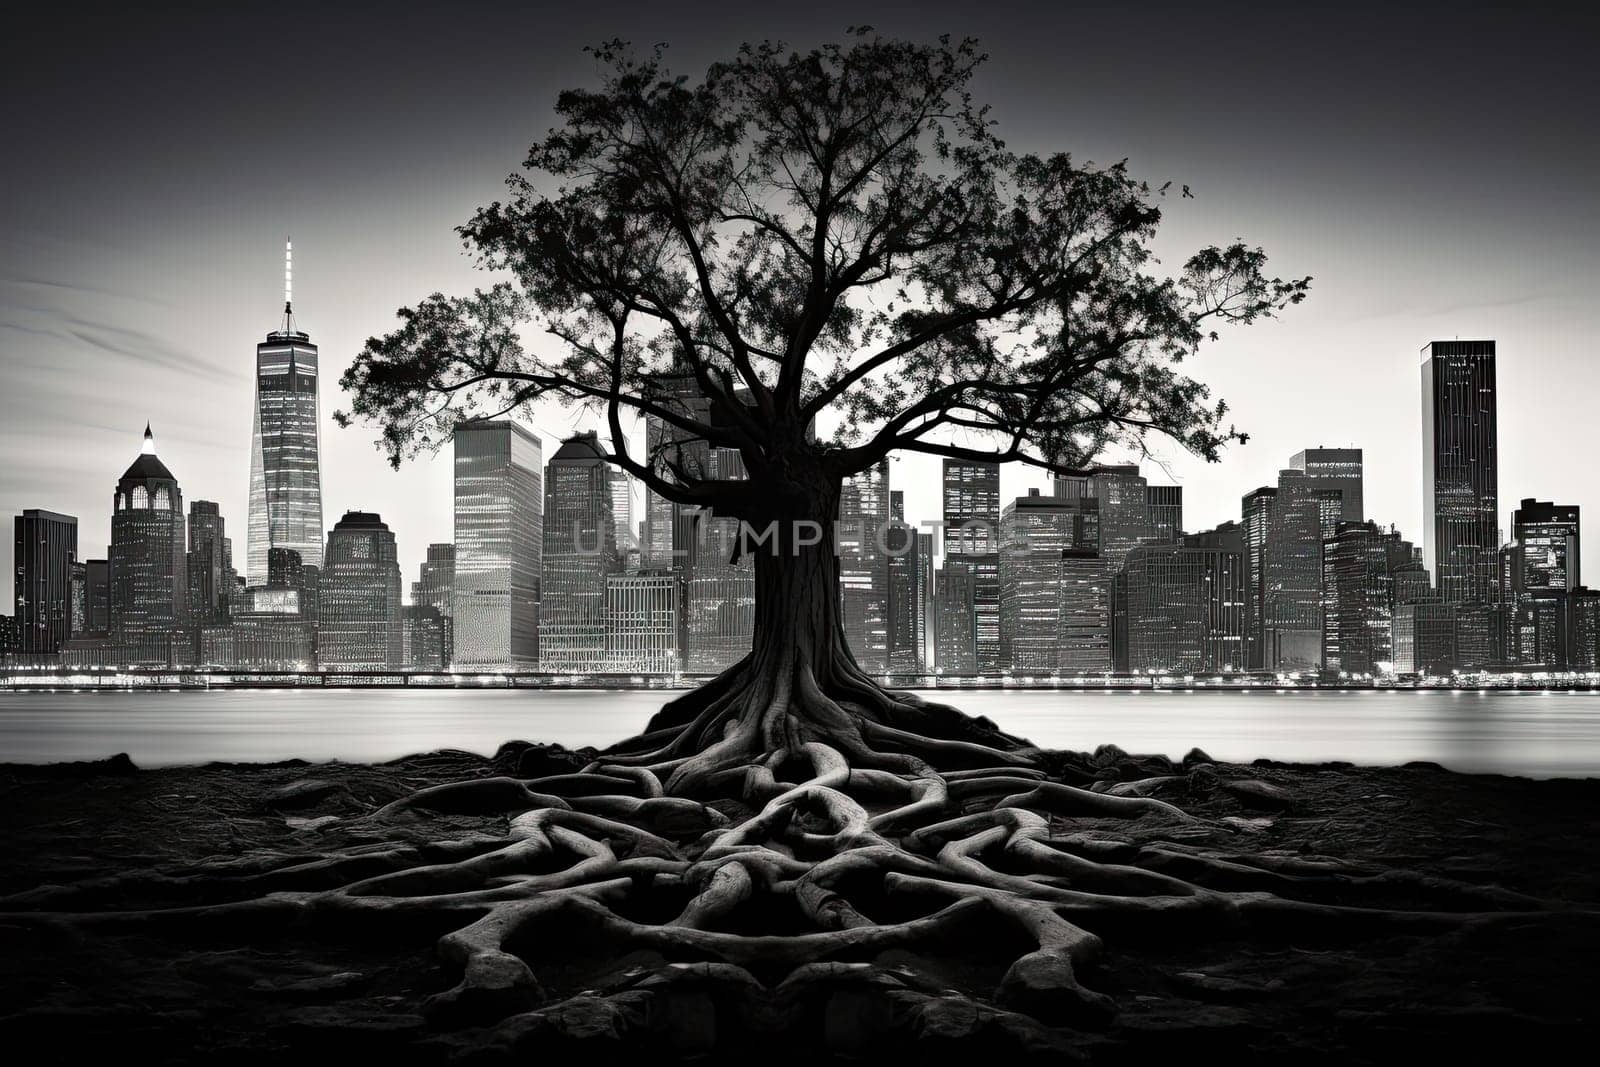 A black and white photo of a tree with a city in the background by golibtolibov